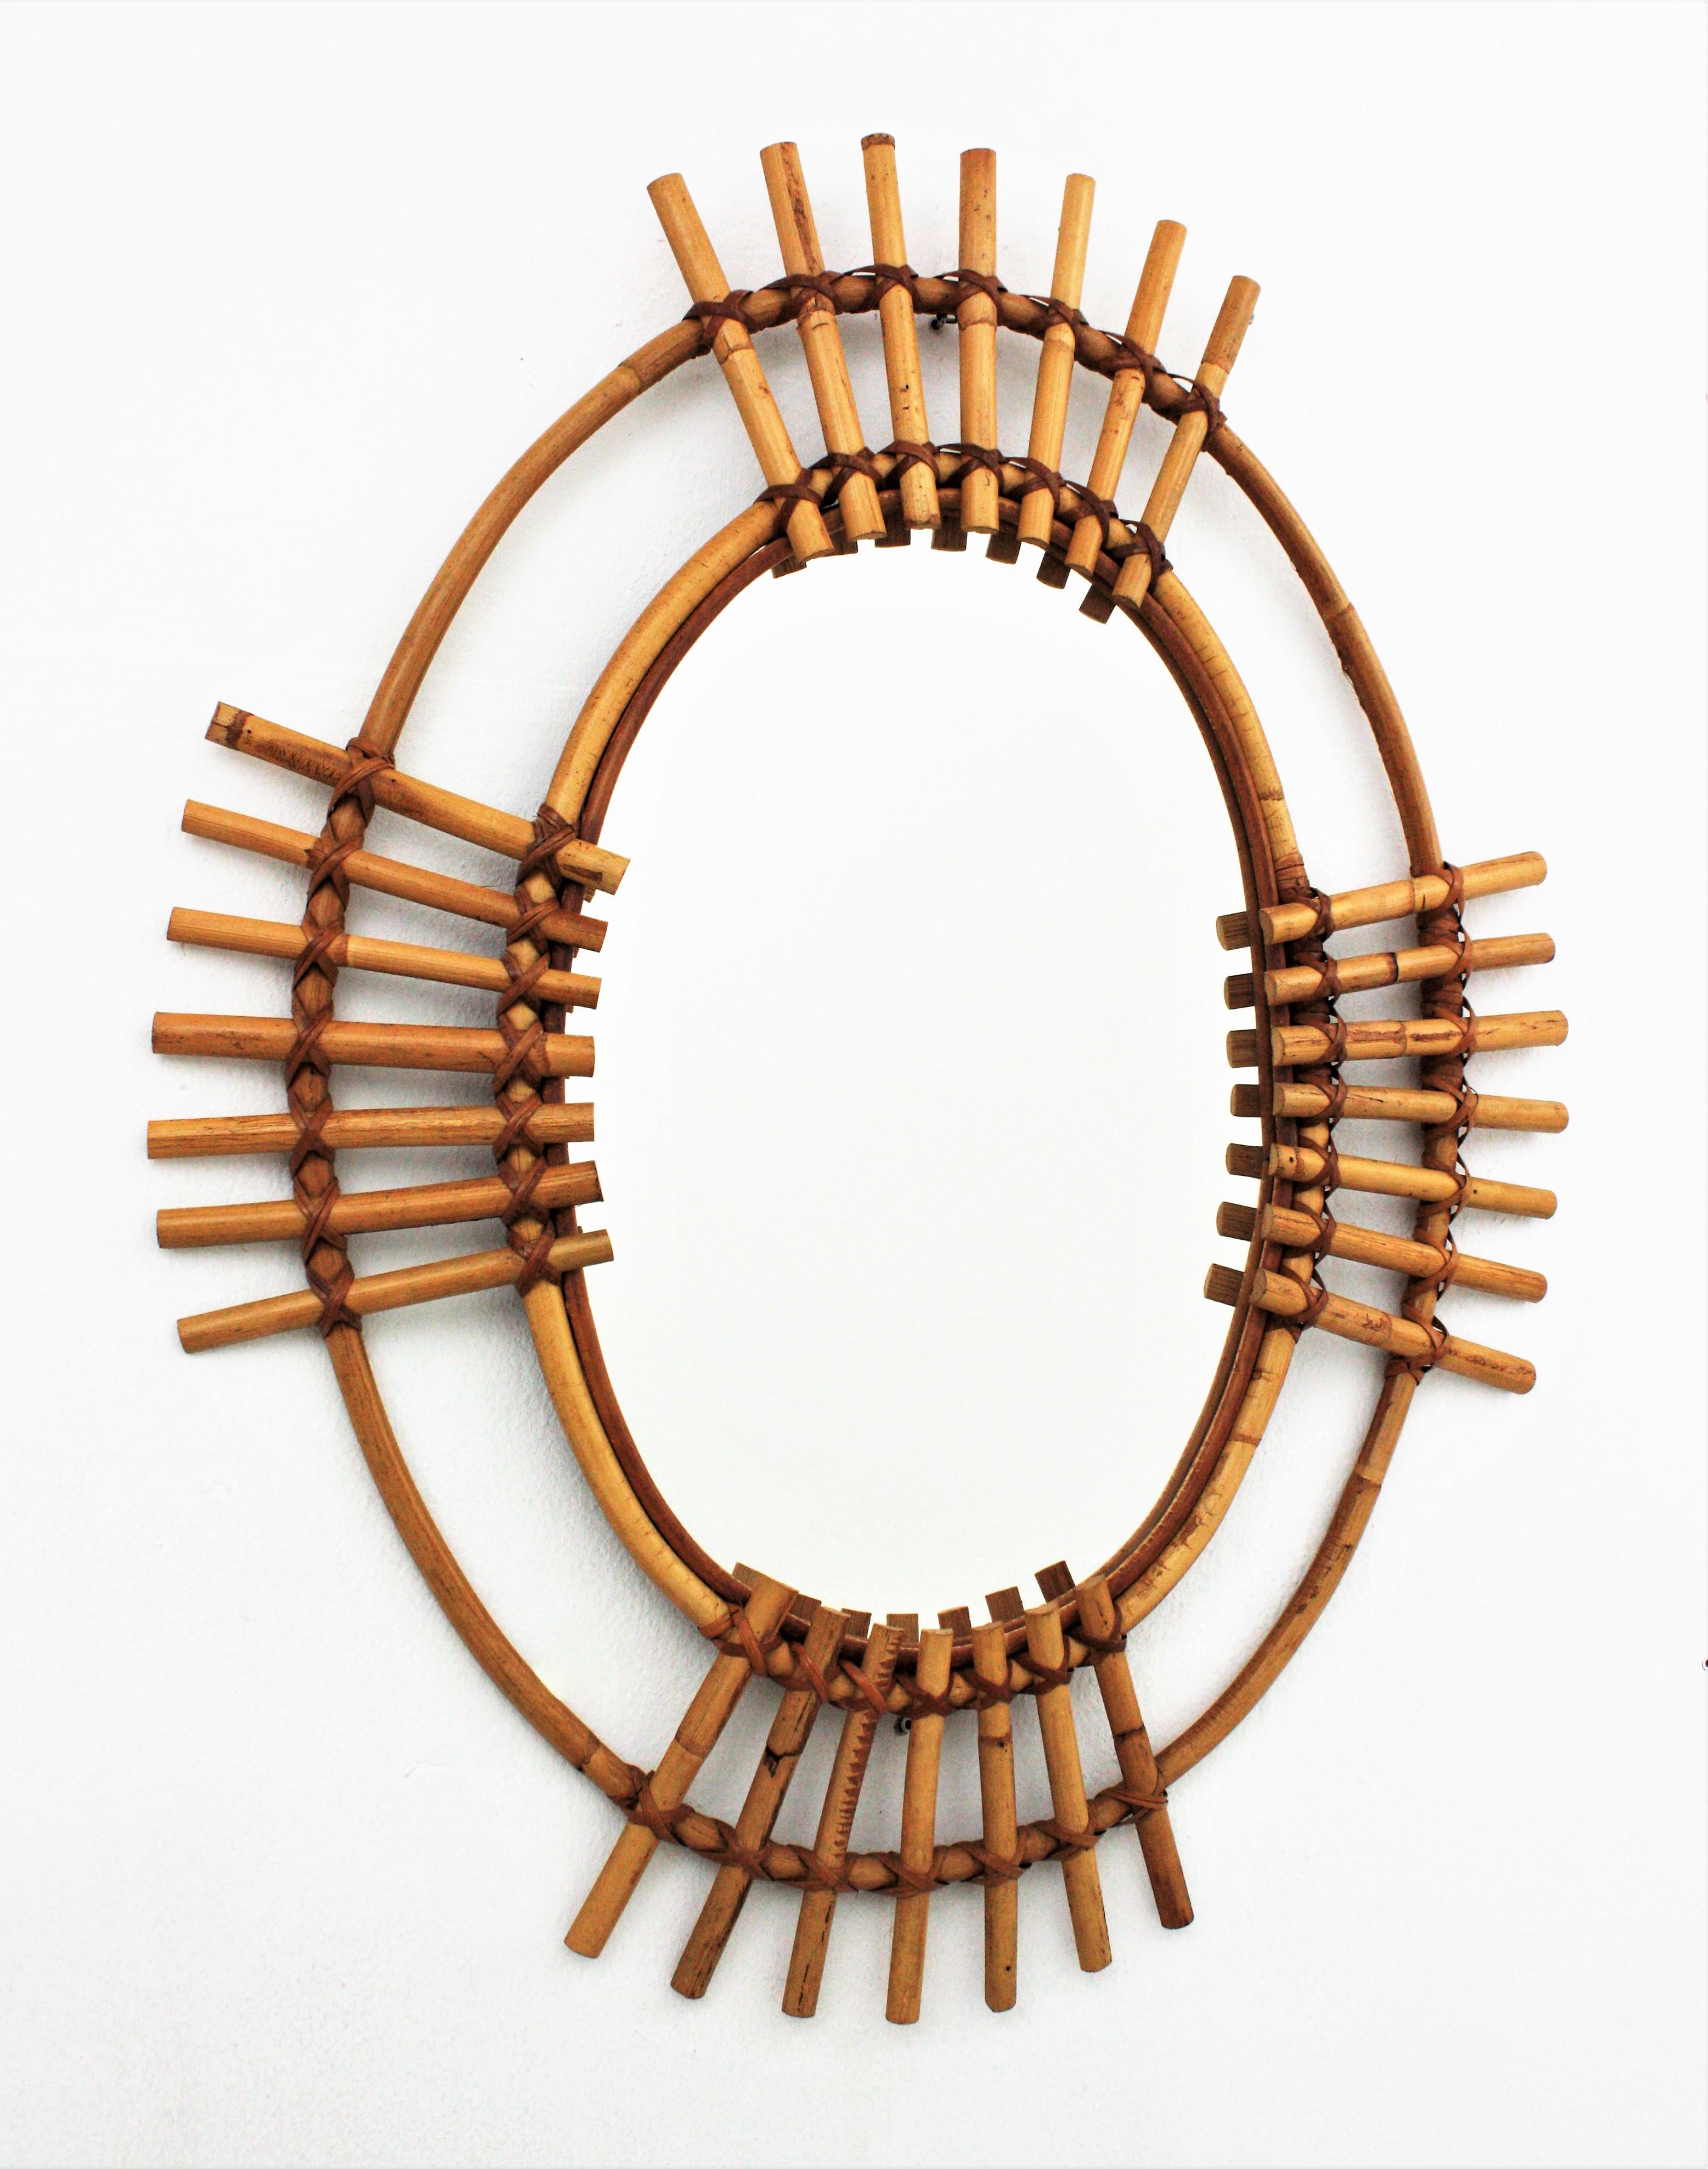 Eye-catching Mid-Century Modern large oval sunburst mirror in bamboo and rattan, Spain, 1960s.
This wall mirror features a double oval bamboo/rattan frame with split bamboo canes in sunburst disposition.
The large mirror surface allows to use it